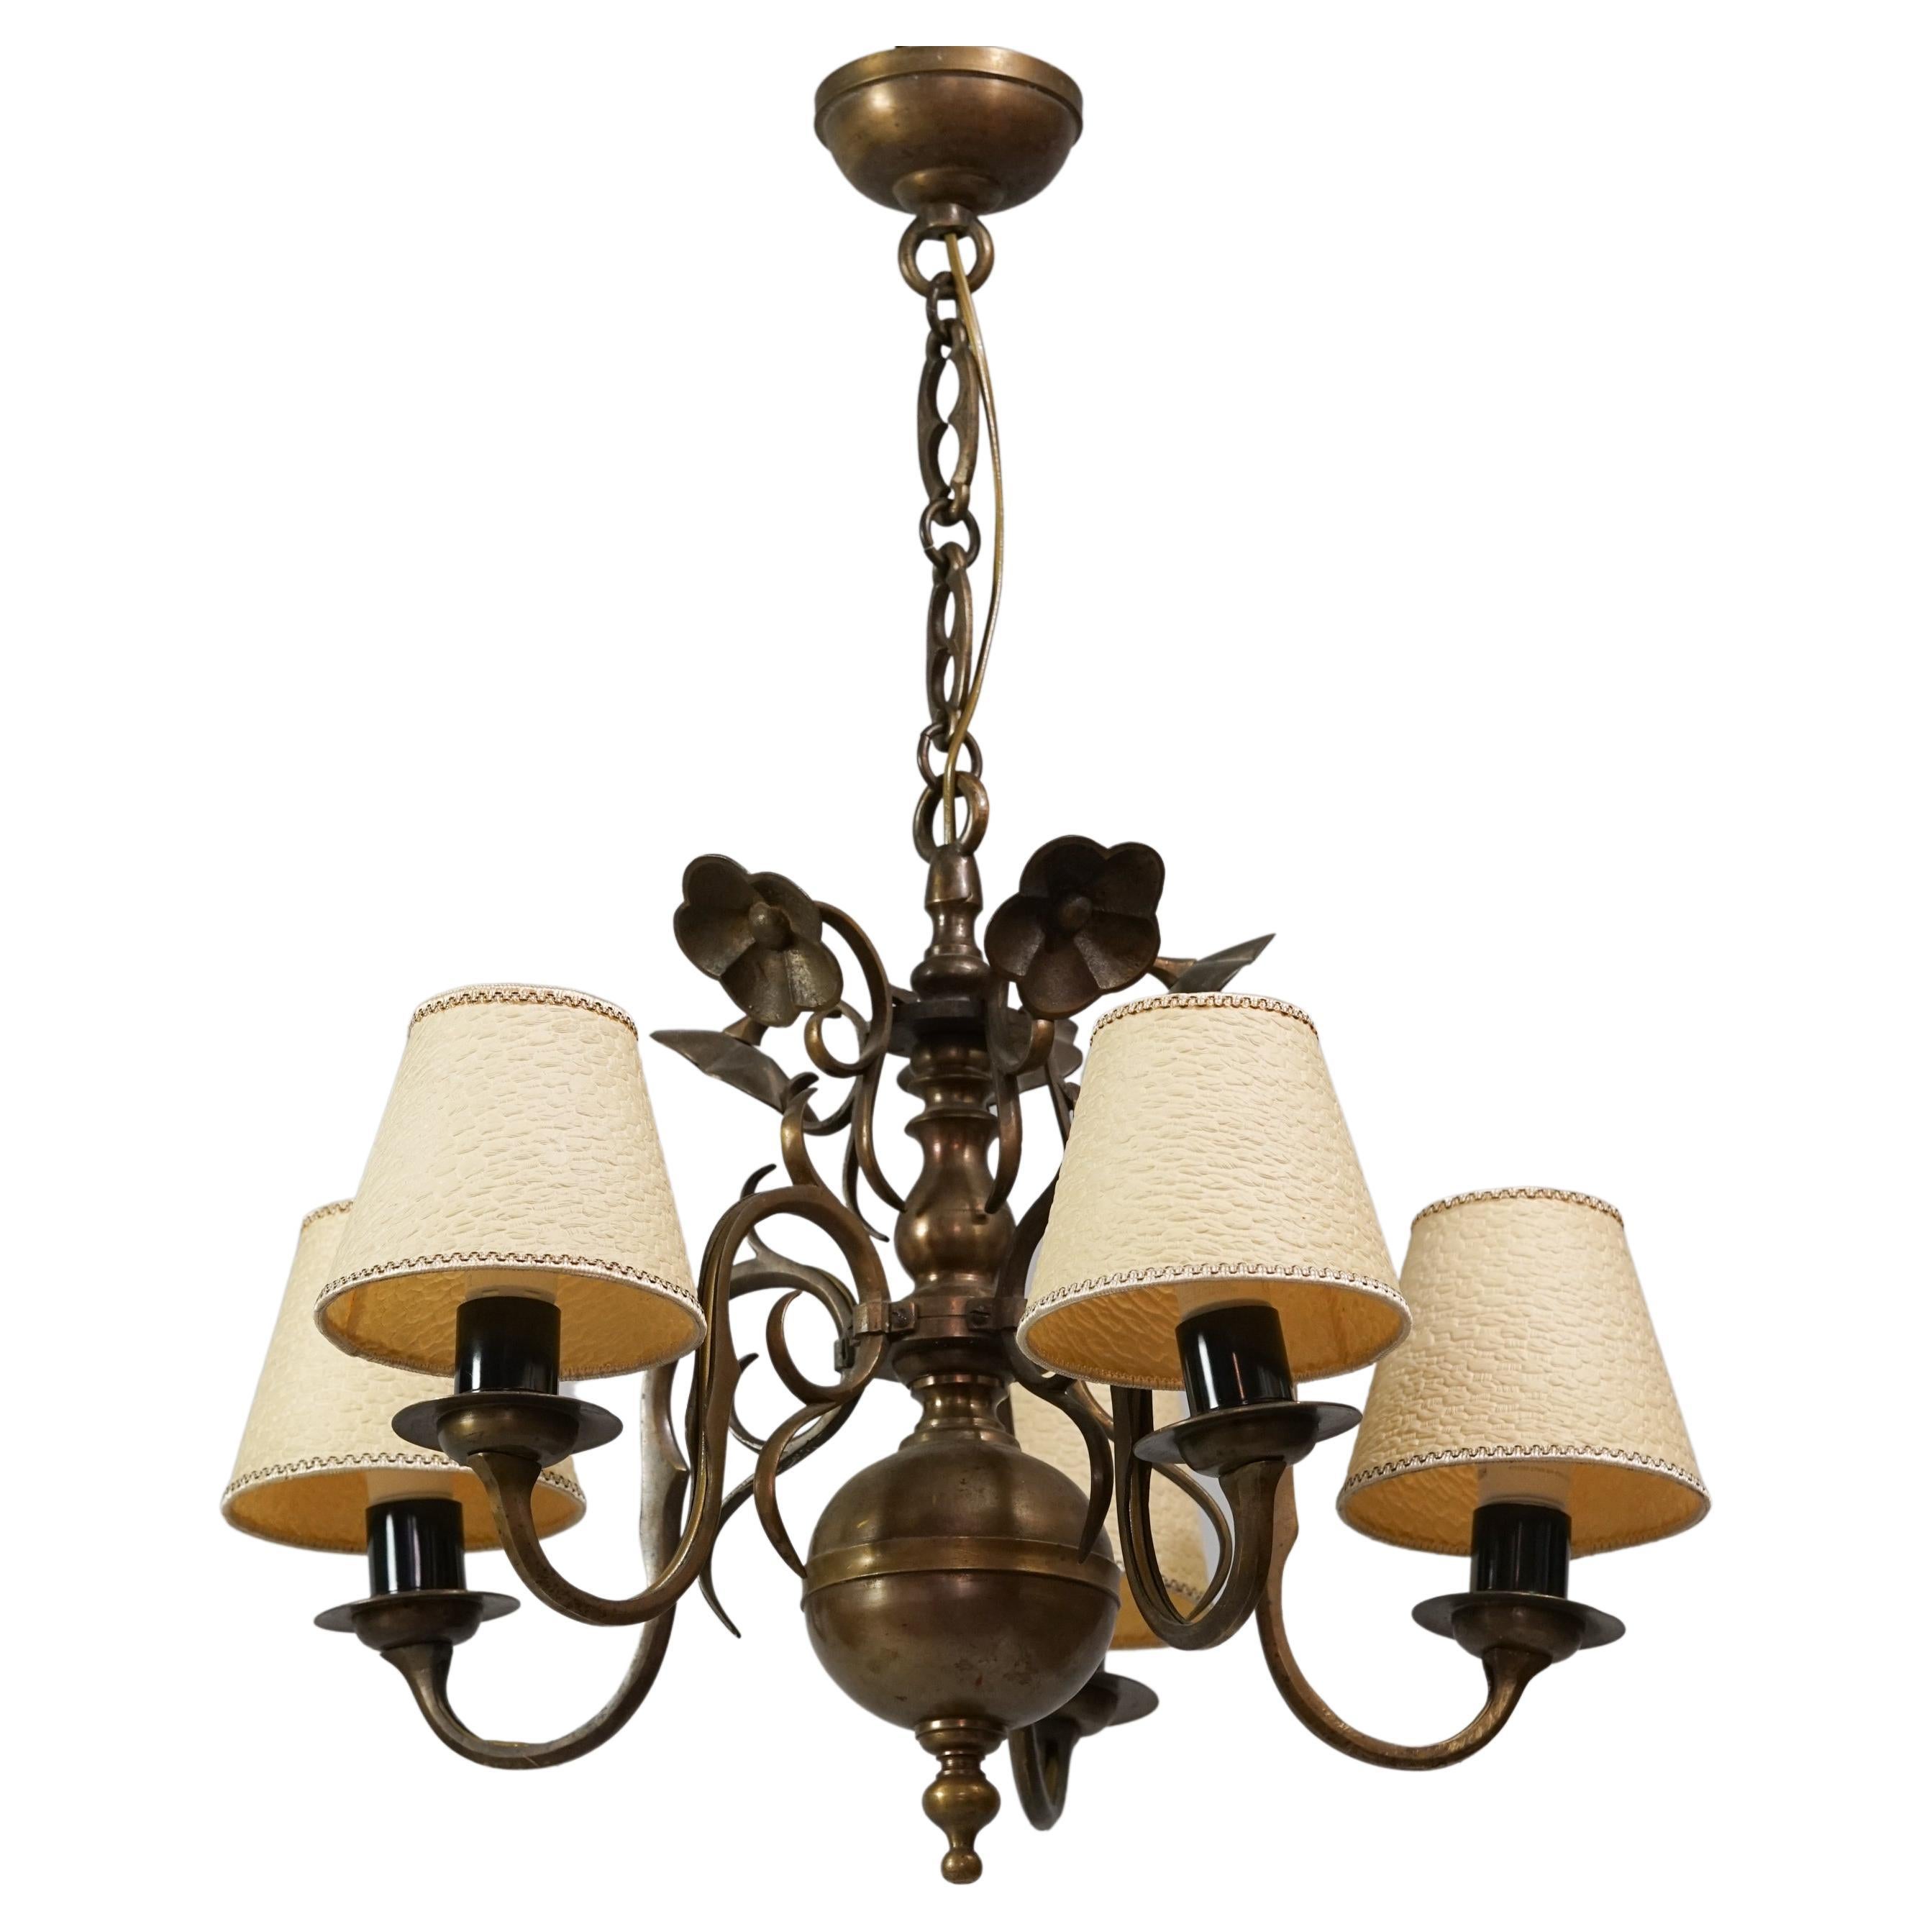 Rare Paavo Tynell Model 50488 Brass Chandelier for Taito Oy from the 1920/1930s For Sale